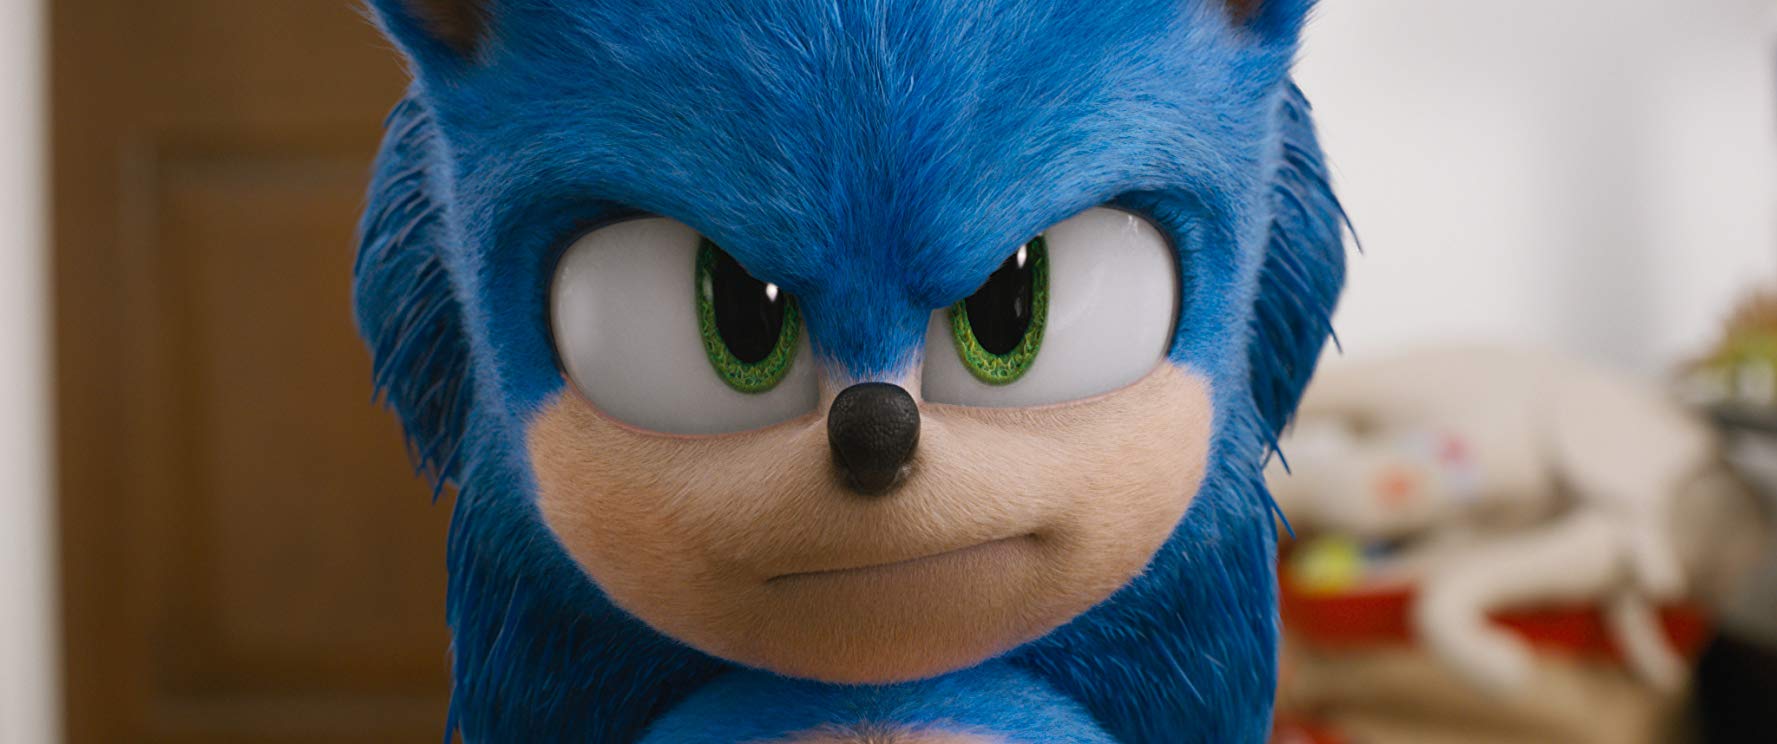 sonic live action series